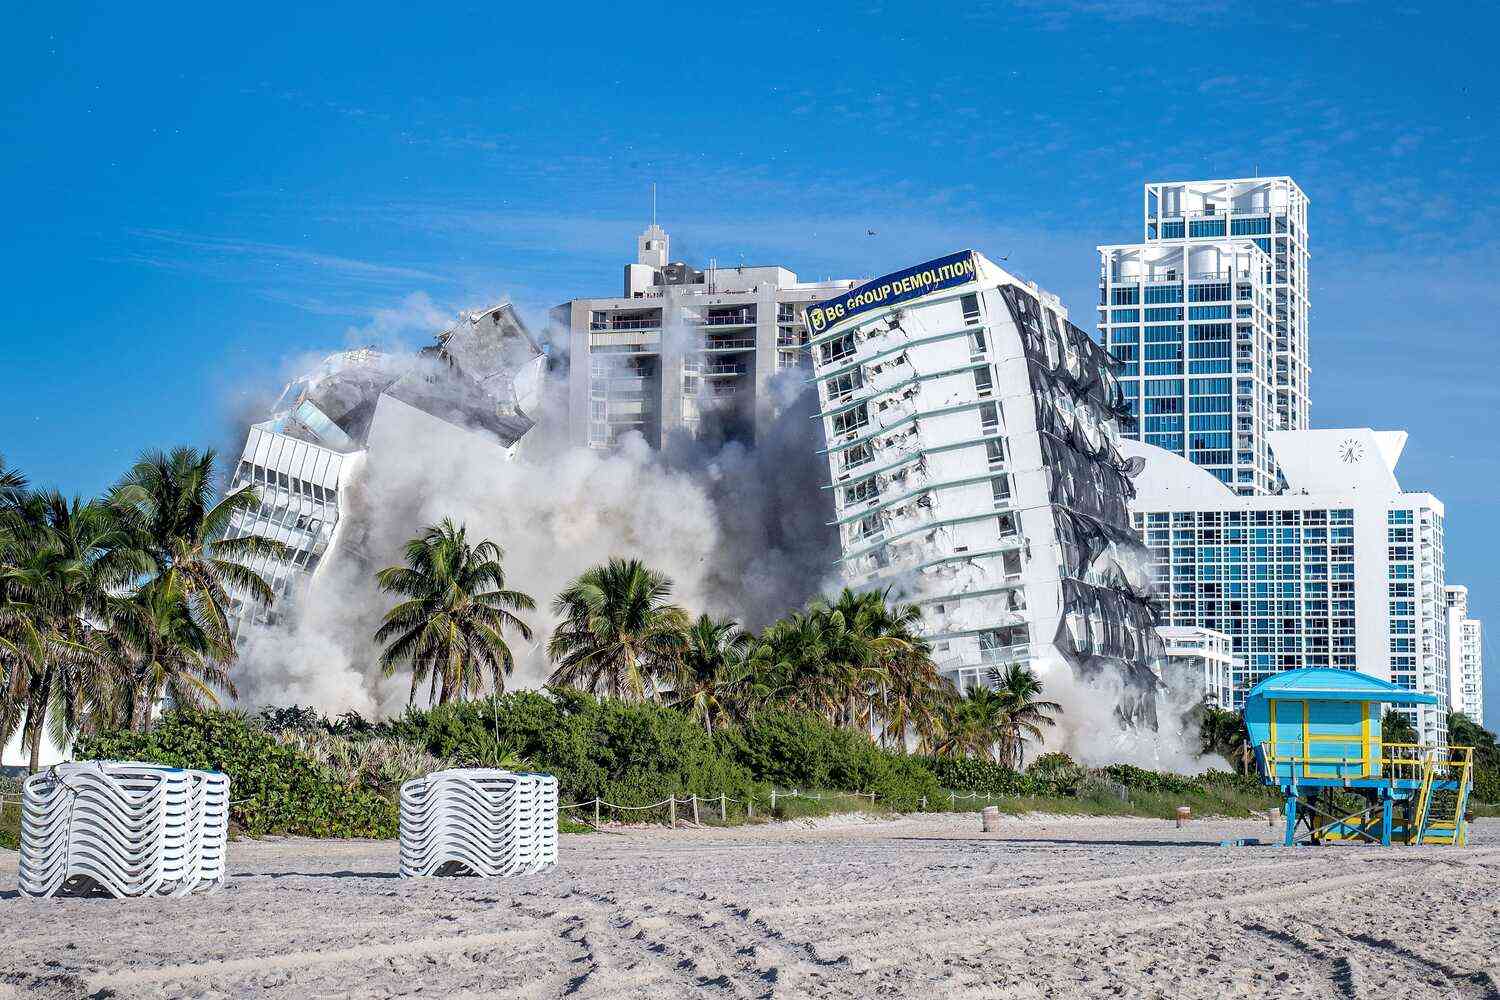 The Palm Beach Hotel is on the verge of demolition